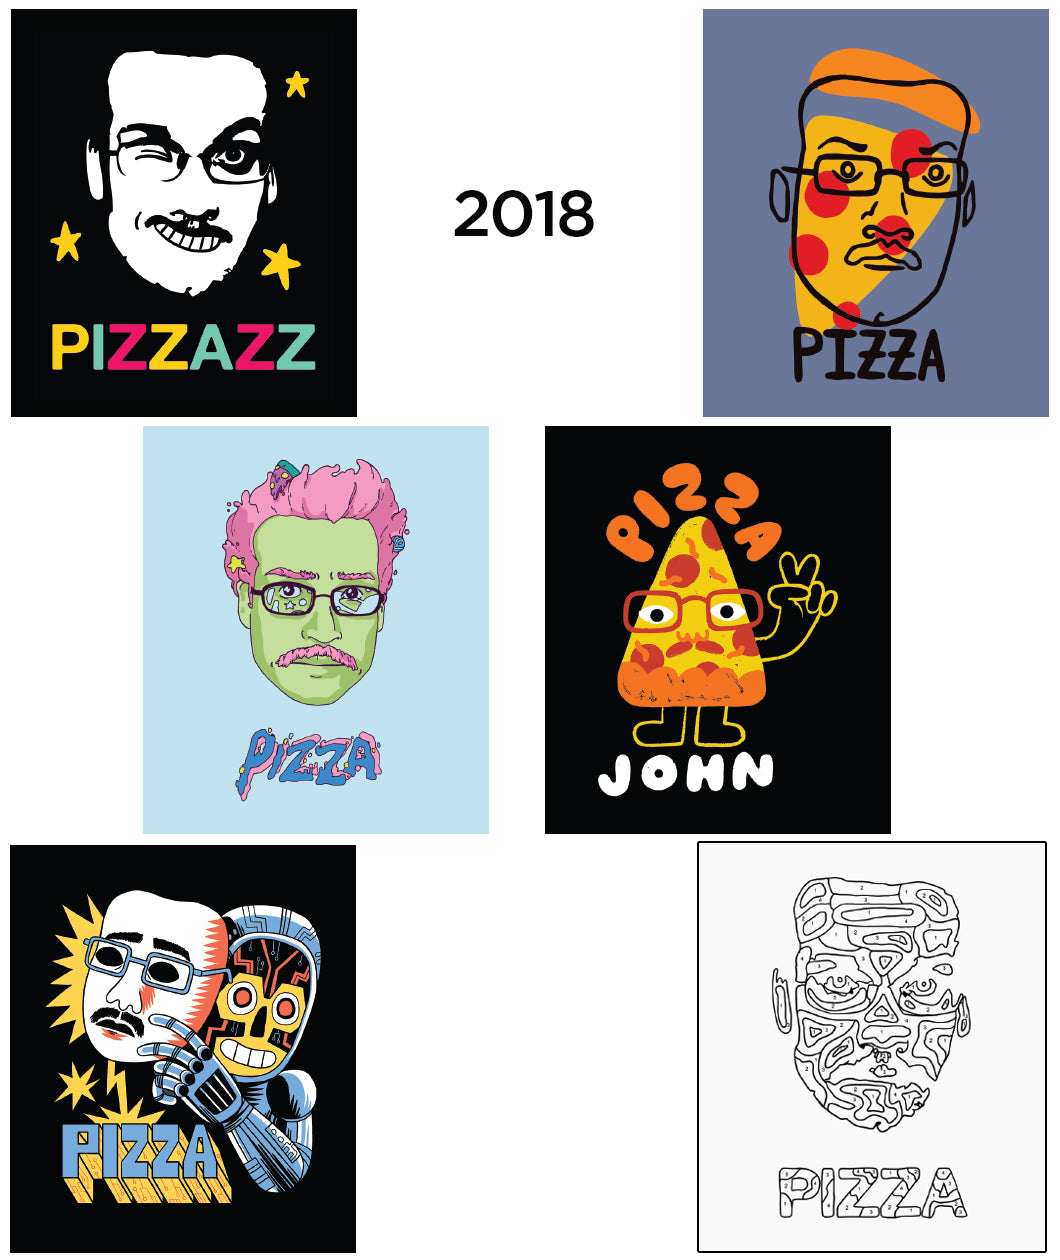 Six different Pizza John designs as stickers from 2018 - from Vlogbrothers